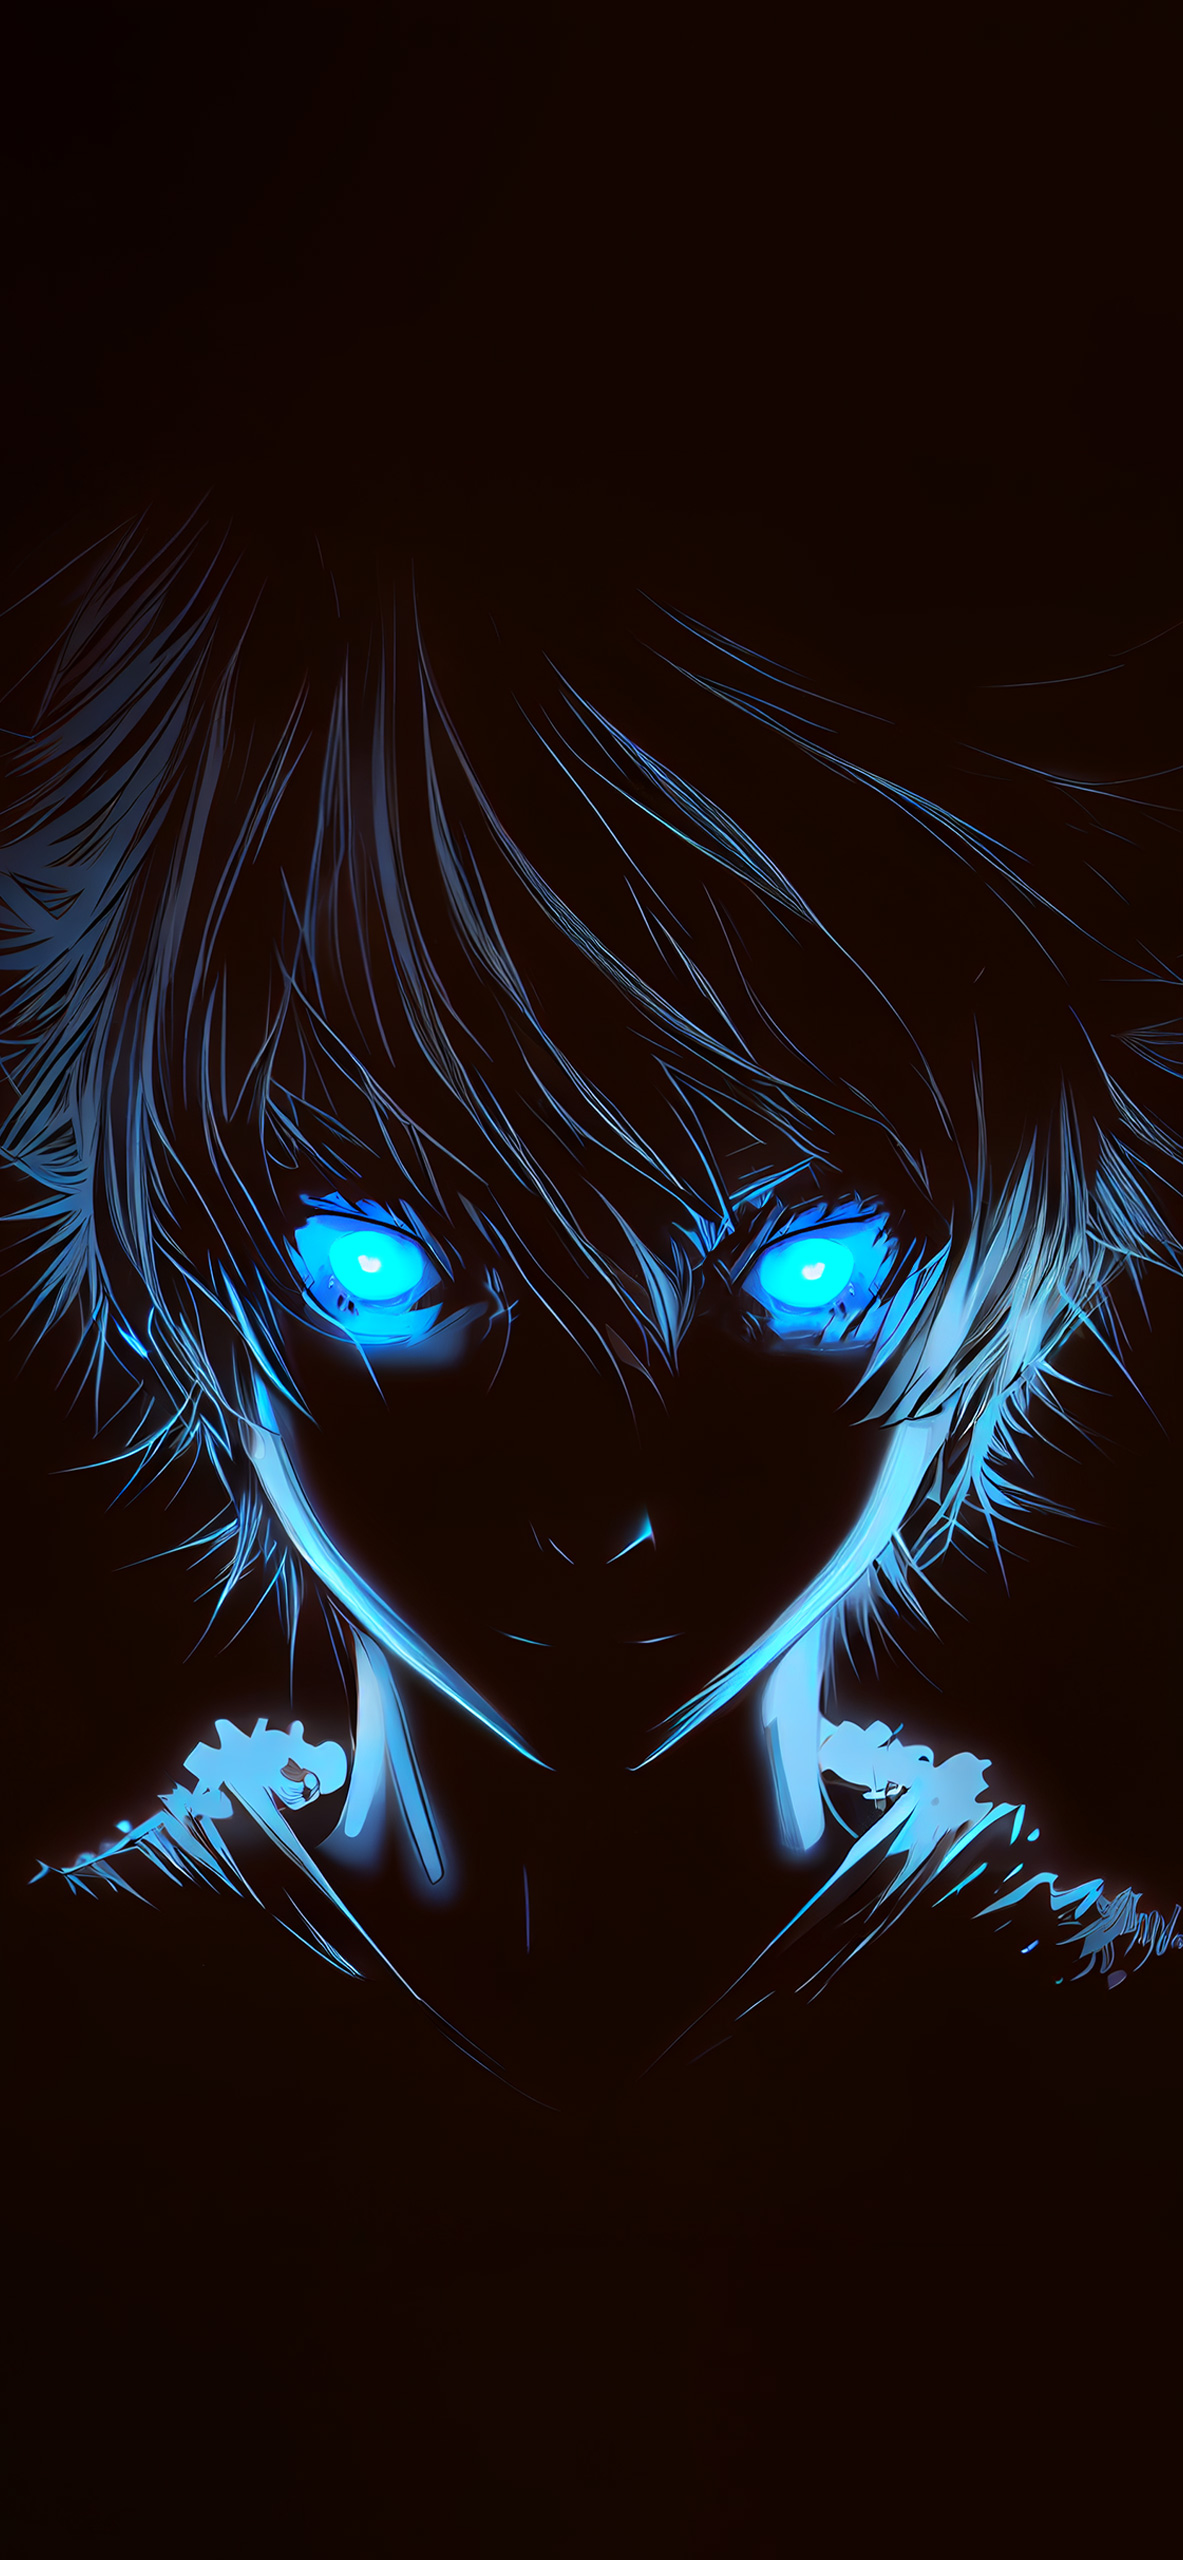 boy with blue glowing eyes anime wallpaper